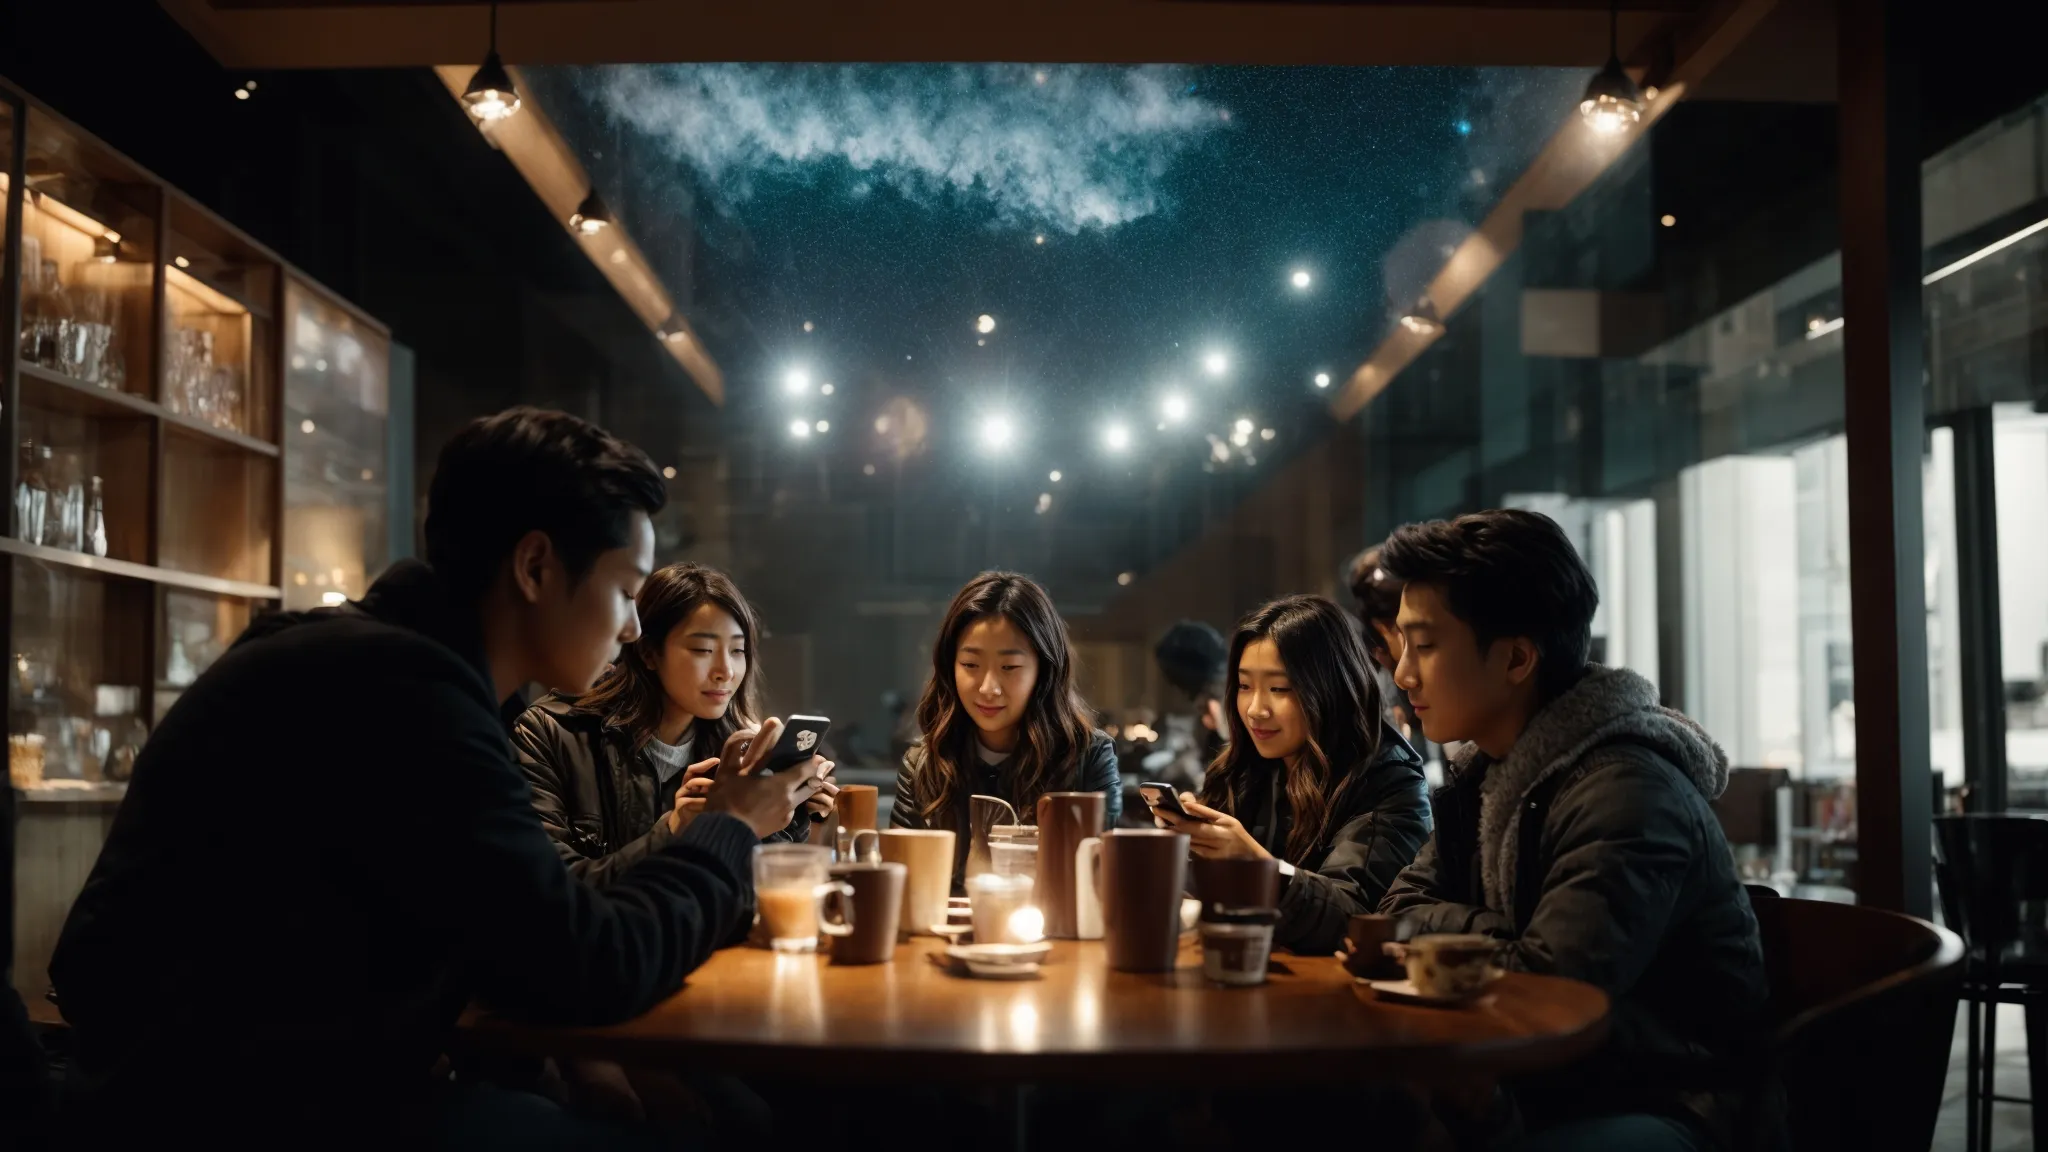 a group of people gathered in a cafe, interacting with their smartphones and a visible social media interface projected in the air above them.